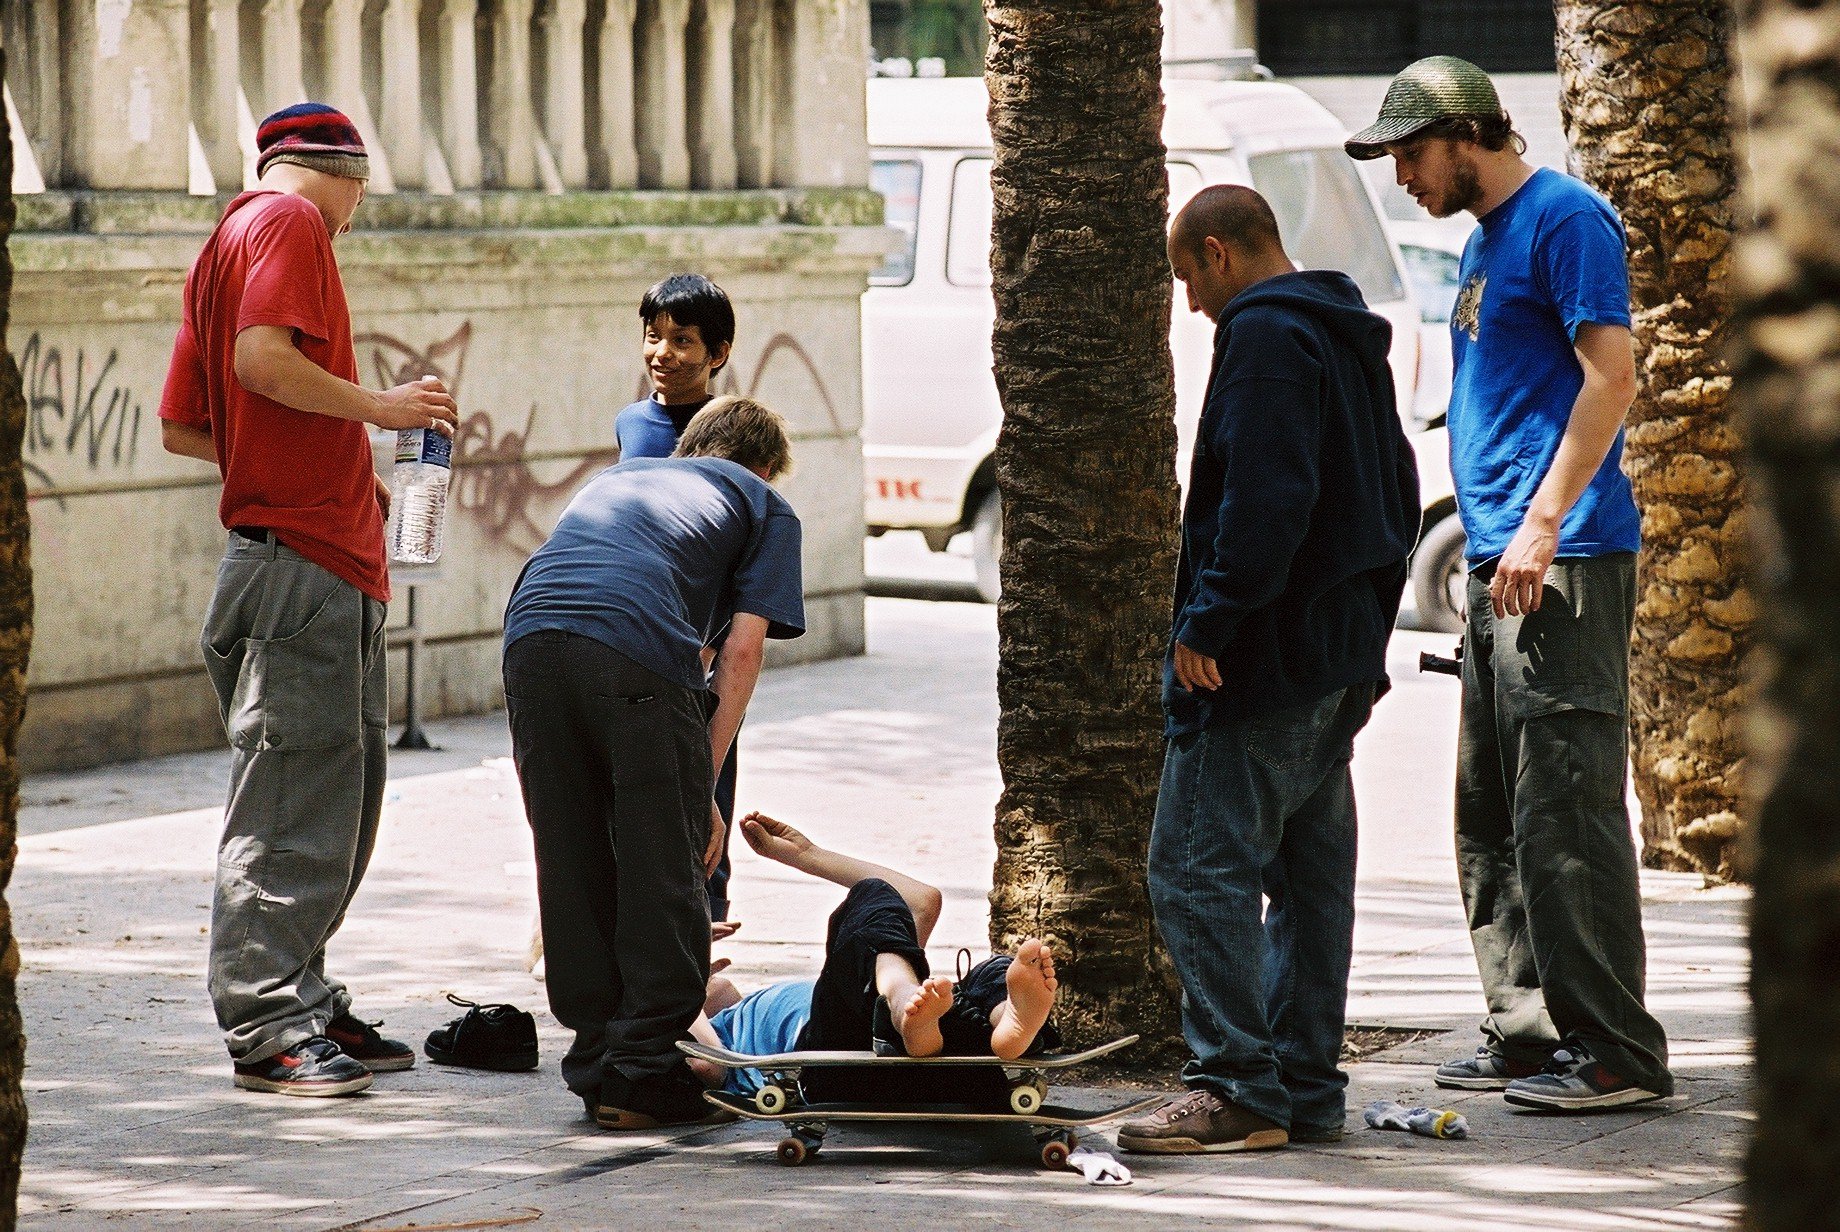  Fifty-Fifty Skate Team in Barcelona in 2003 